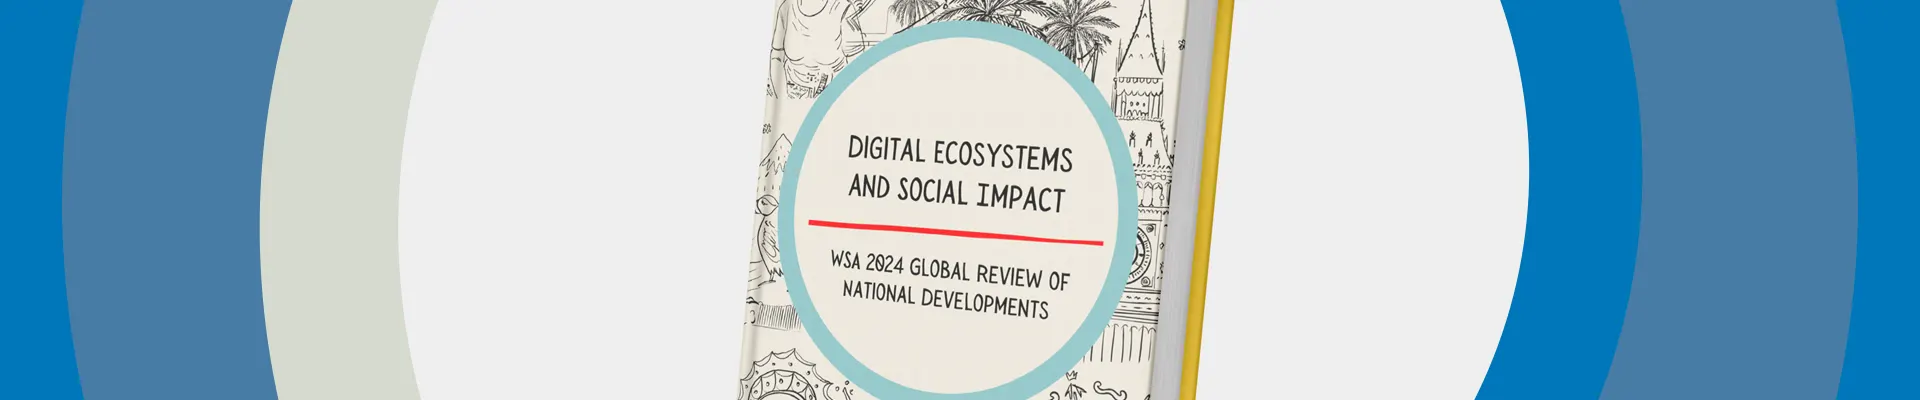 Get access to "Digital Ecosystems and Social Impact" PDF